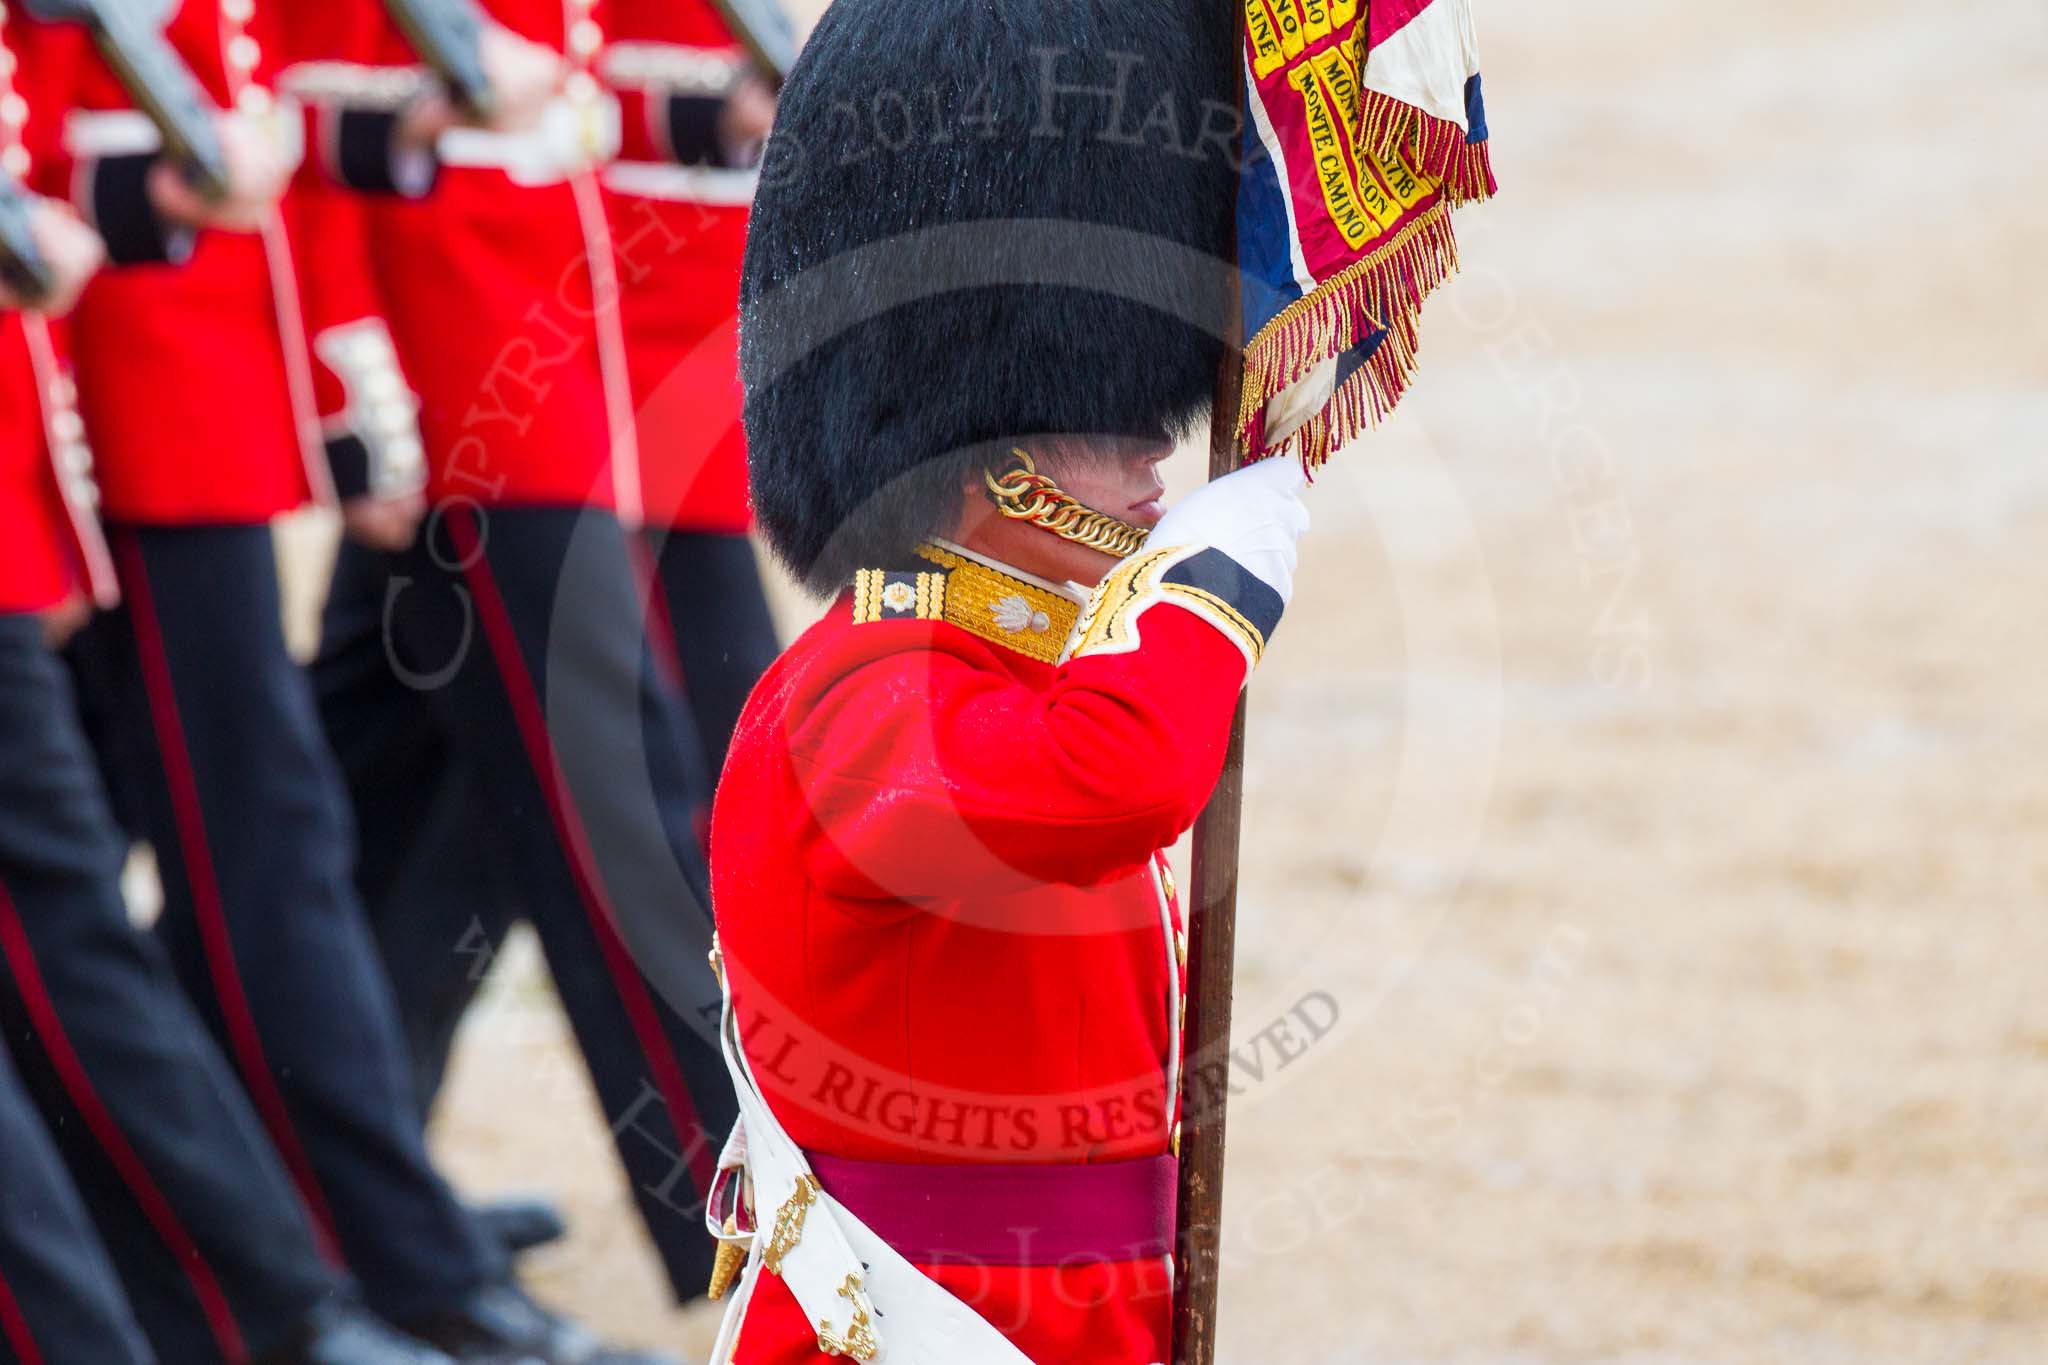 The Colonel's Review 2014.
Horse Guards Parade, Westminster,
London,

United Kingdom,
on 07 June 2014 at 11:35, image #498